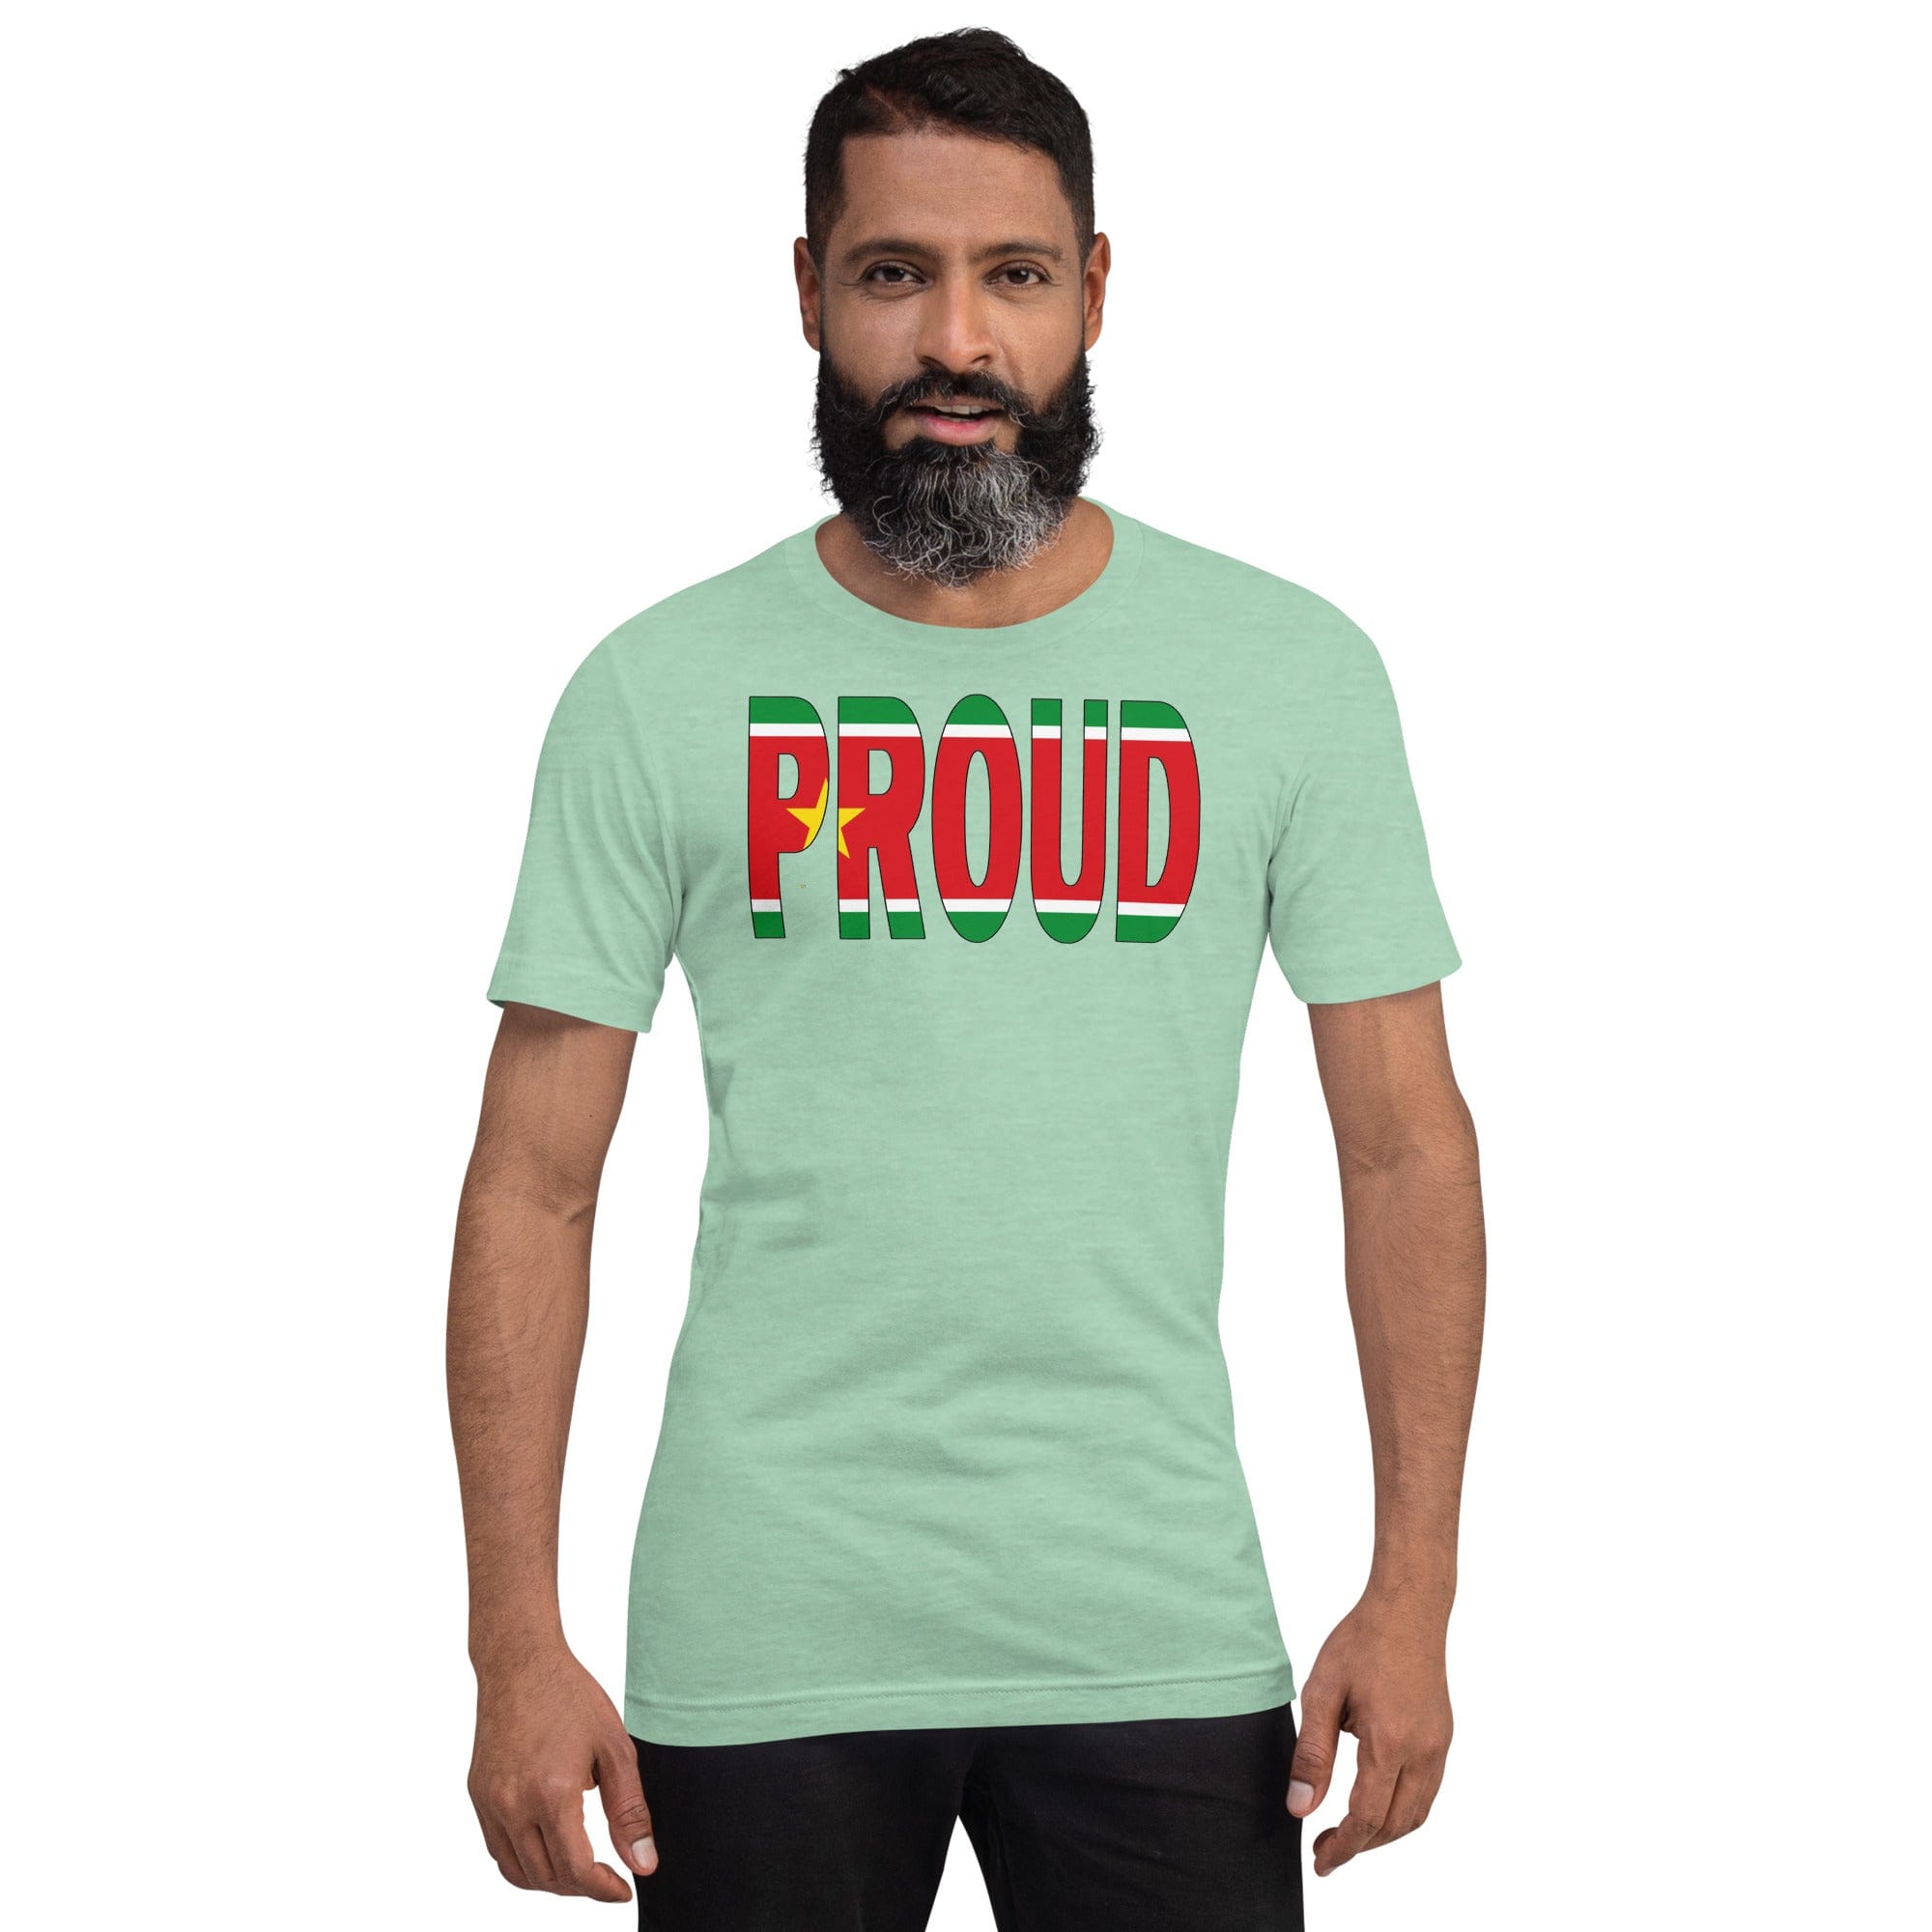 Guadeloupe Flag designed to spell Proud on a mint color t-shirt worn by a black man.